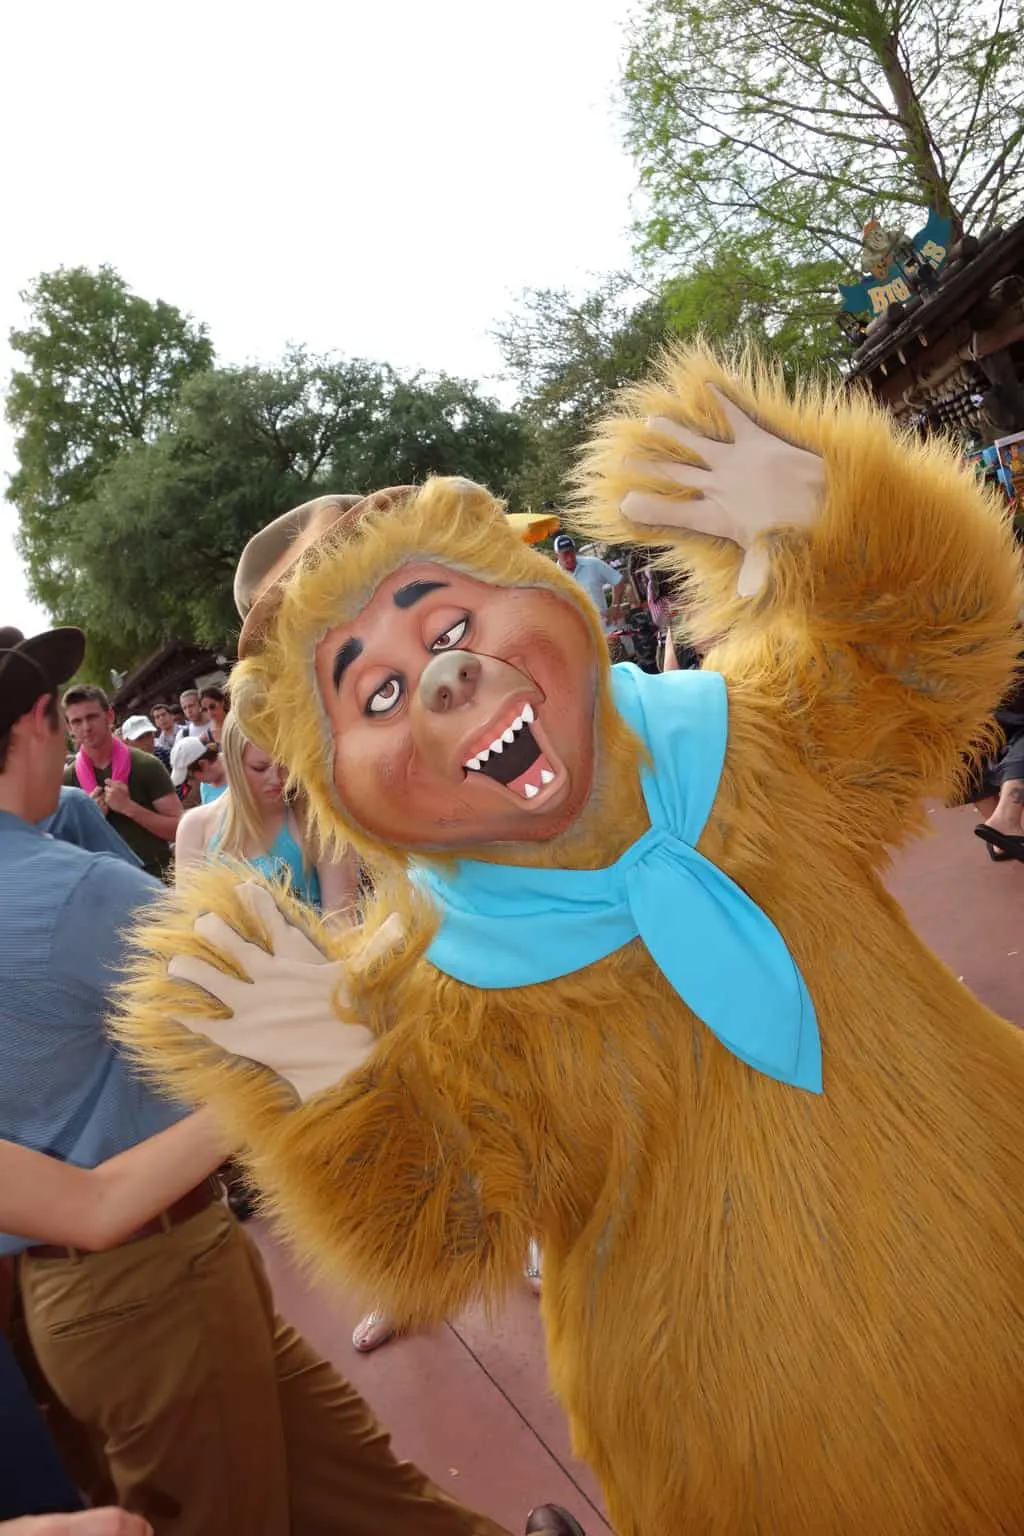 Wendell from the Country Bears at the Frontierland Hoedown Disney World Character meet and greet